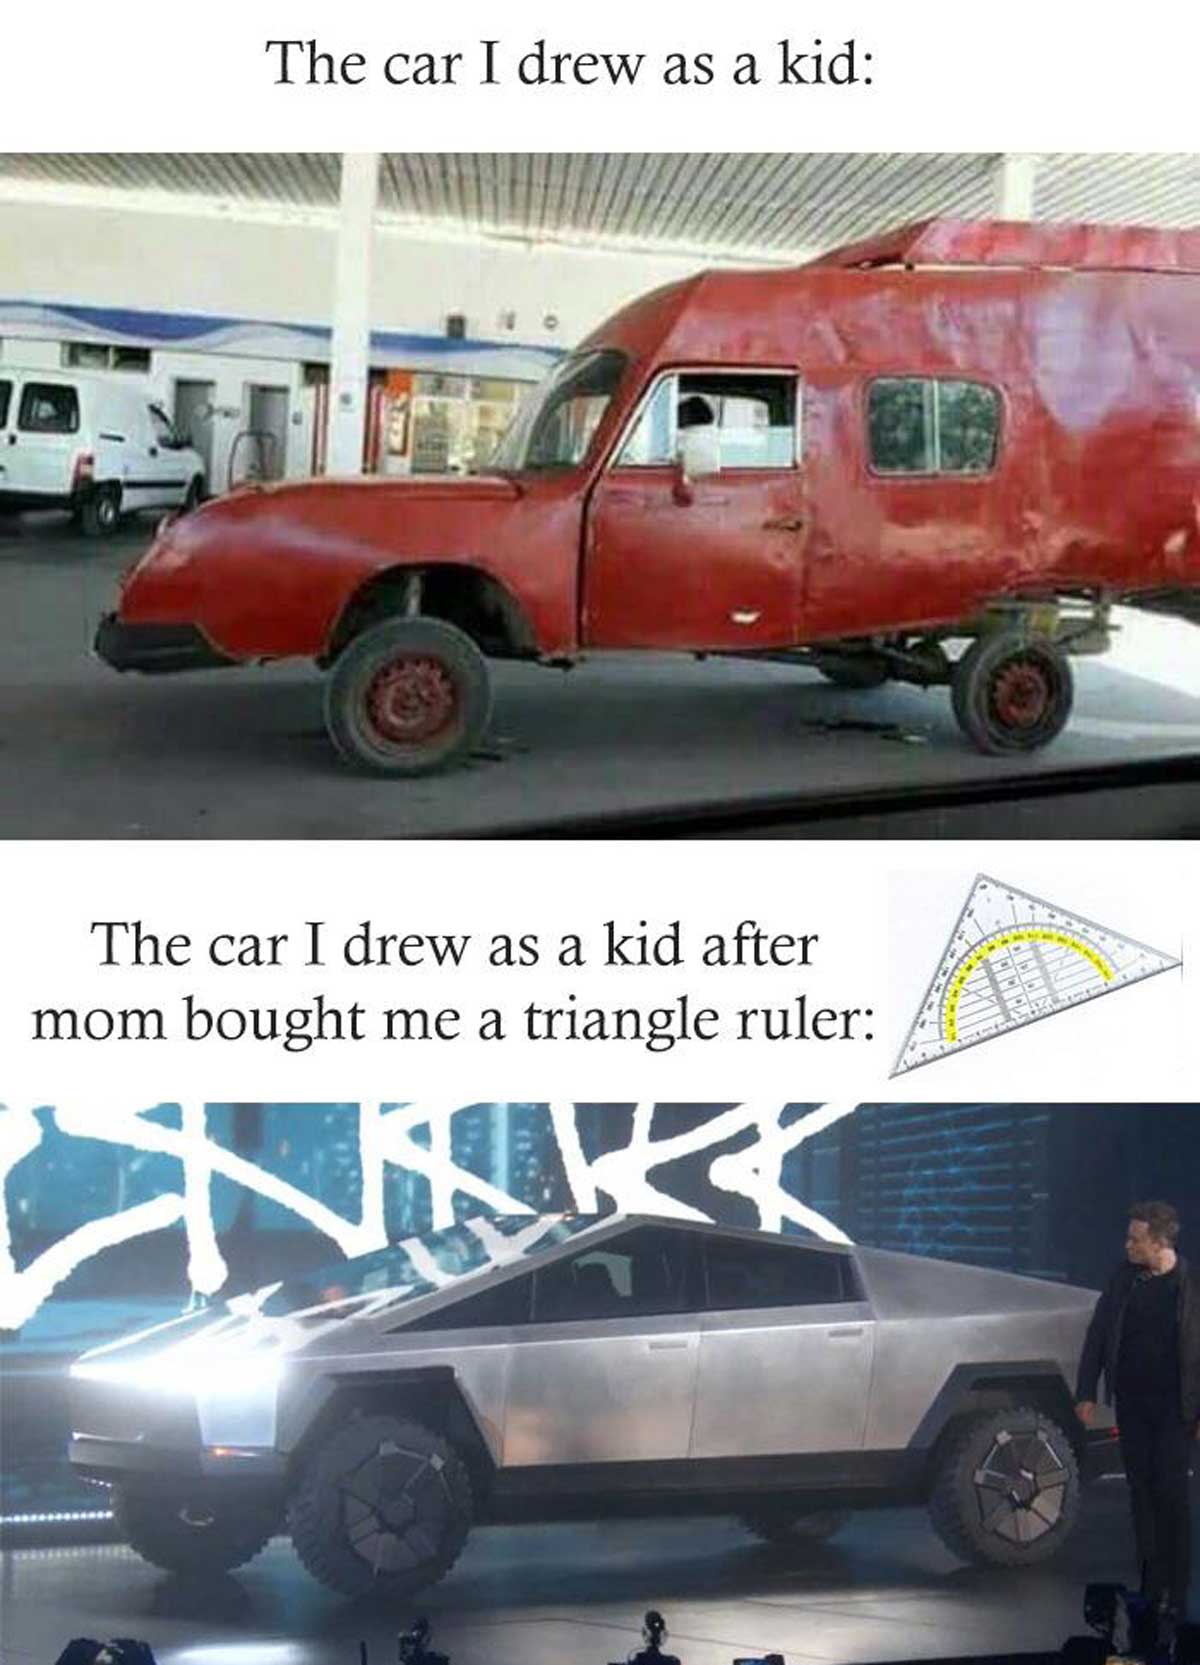 Tesla Truck Memes As Edgy As The Truck Itself (25 Memes)